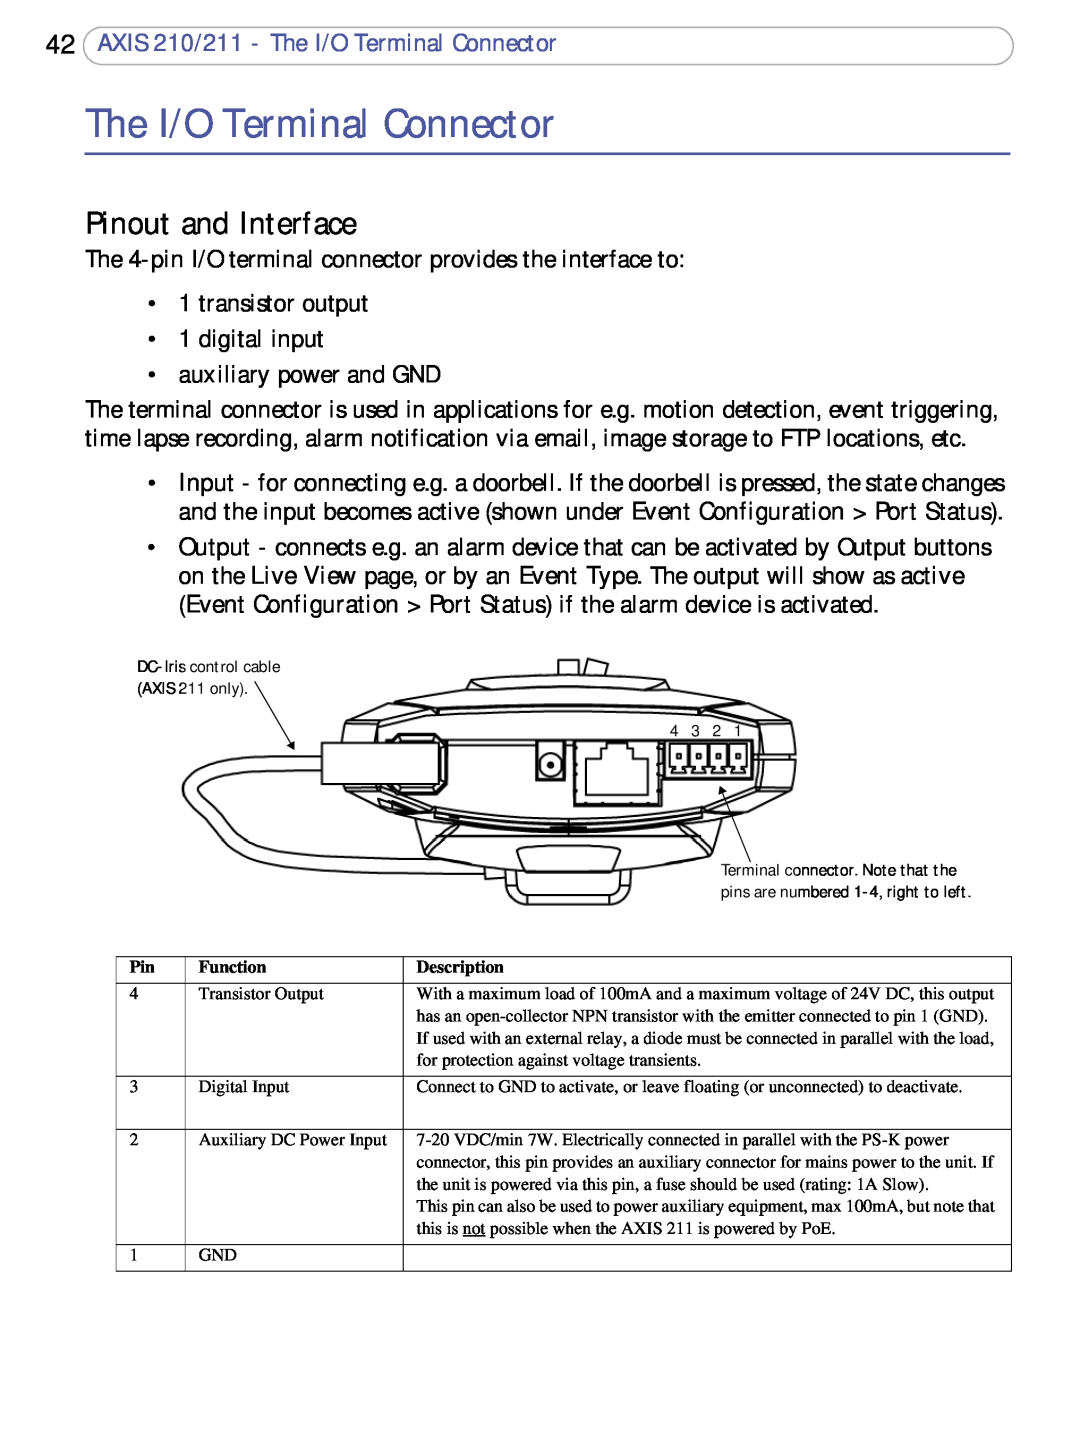 Axis Communications user manual Pinout and Interface, AXIS 210/211 - The I/O Terminal Connector 